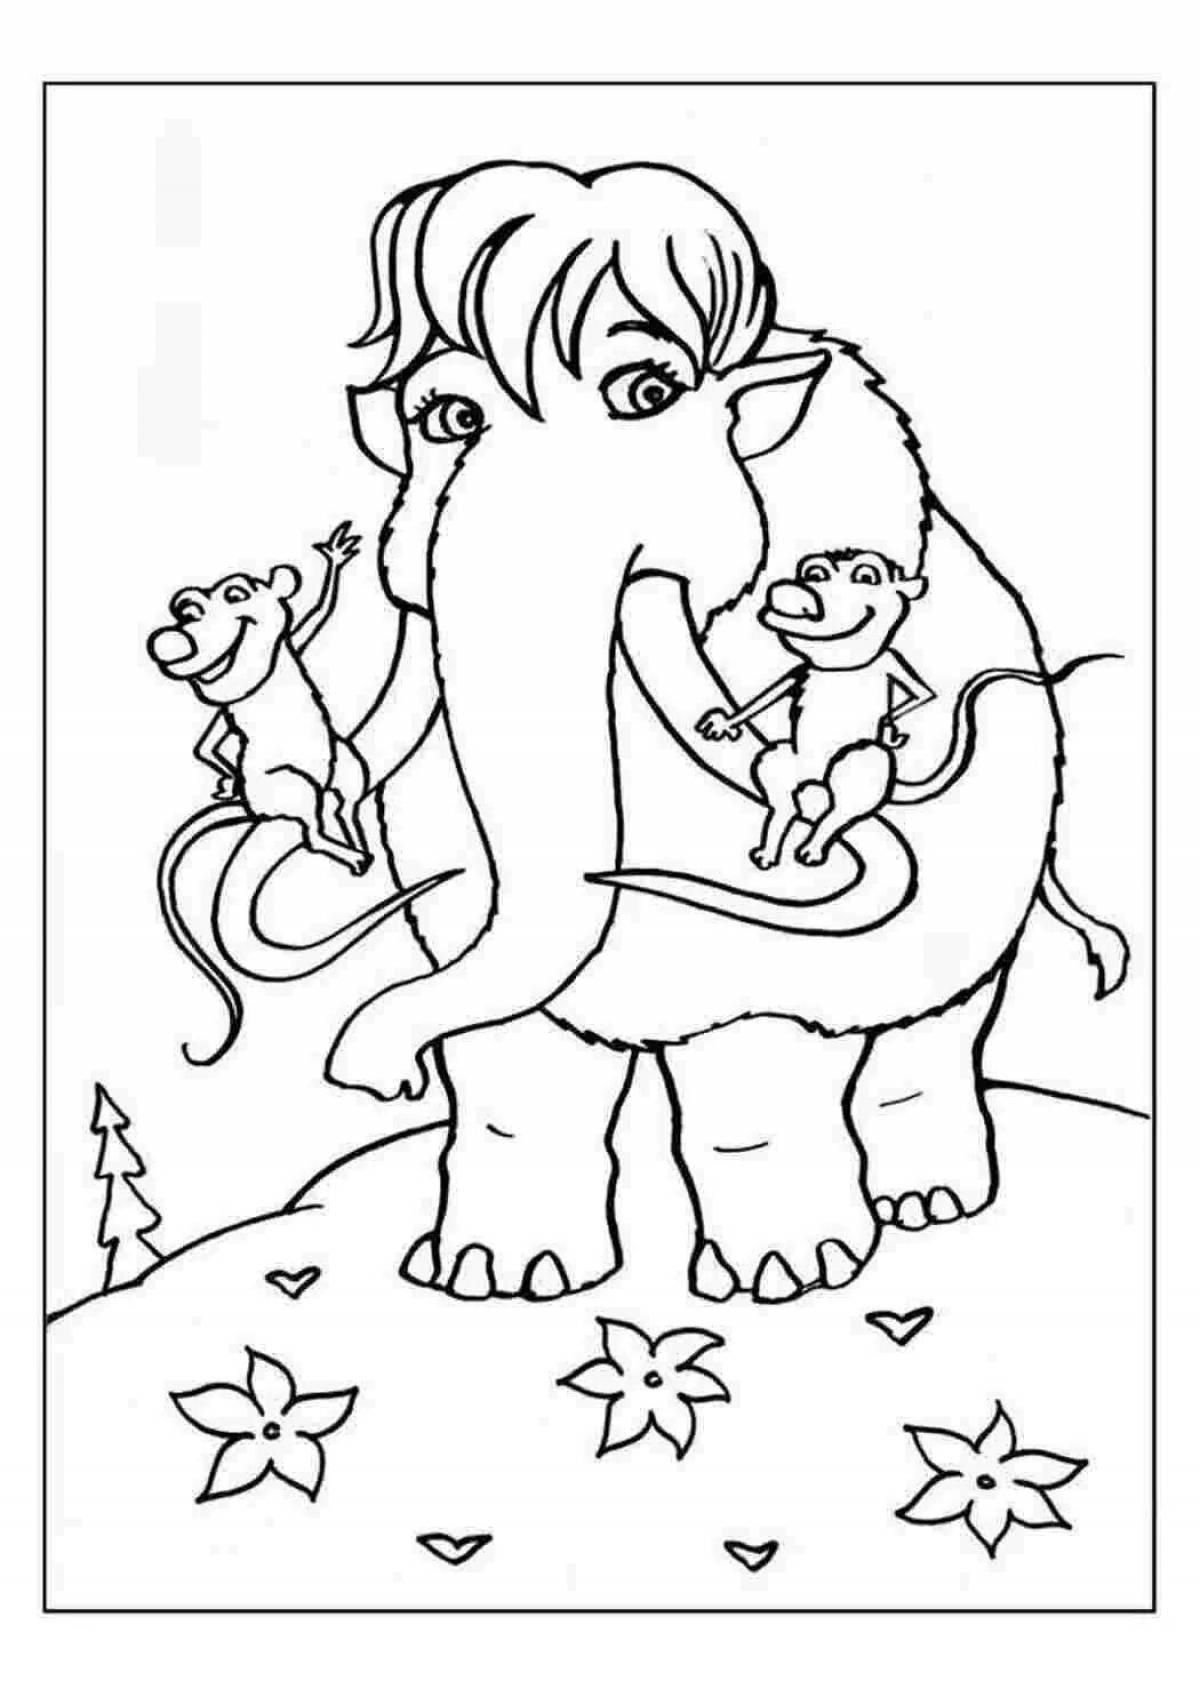 Great mammoth coloring book for kids